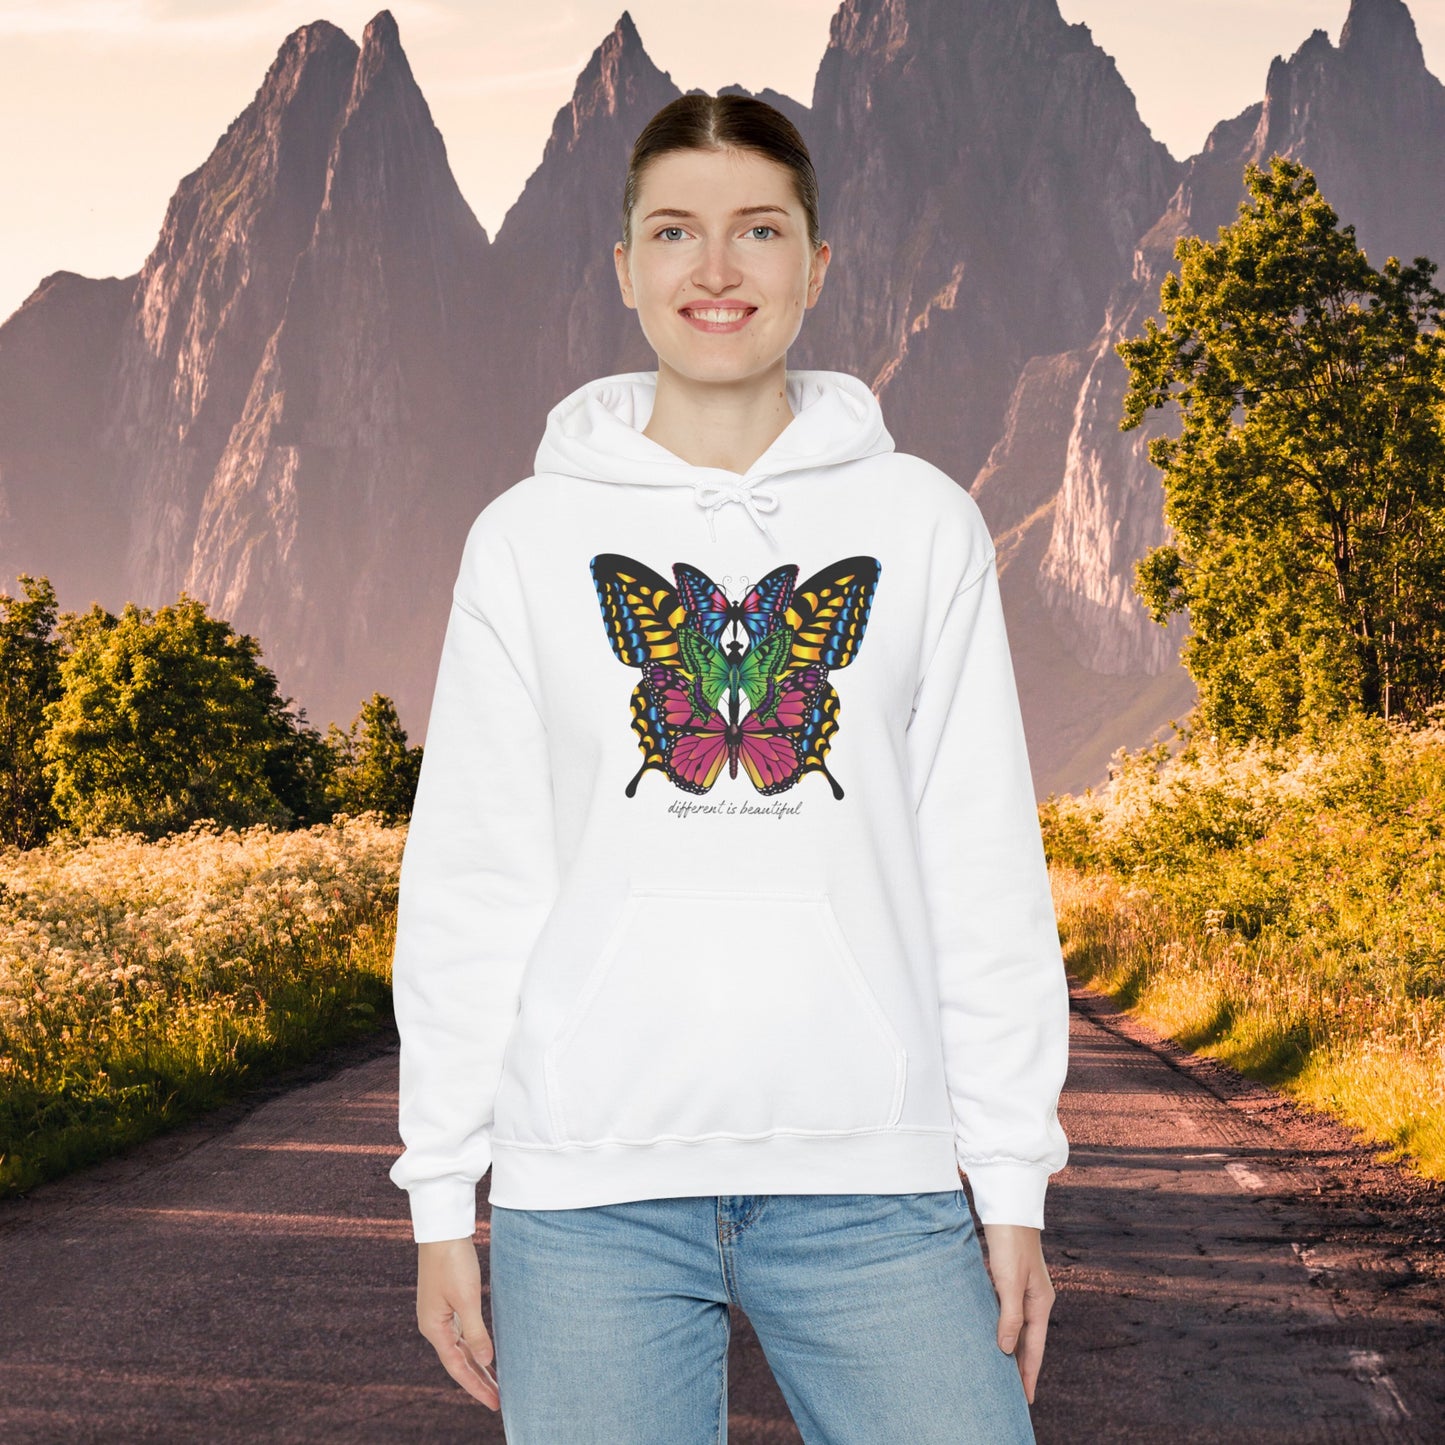 Diversity is celebrated on this butterflies filled “different is beautiful" Unisex Heavy Blend™ Hooded Sweatshirt